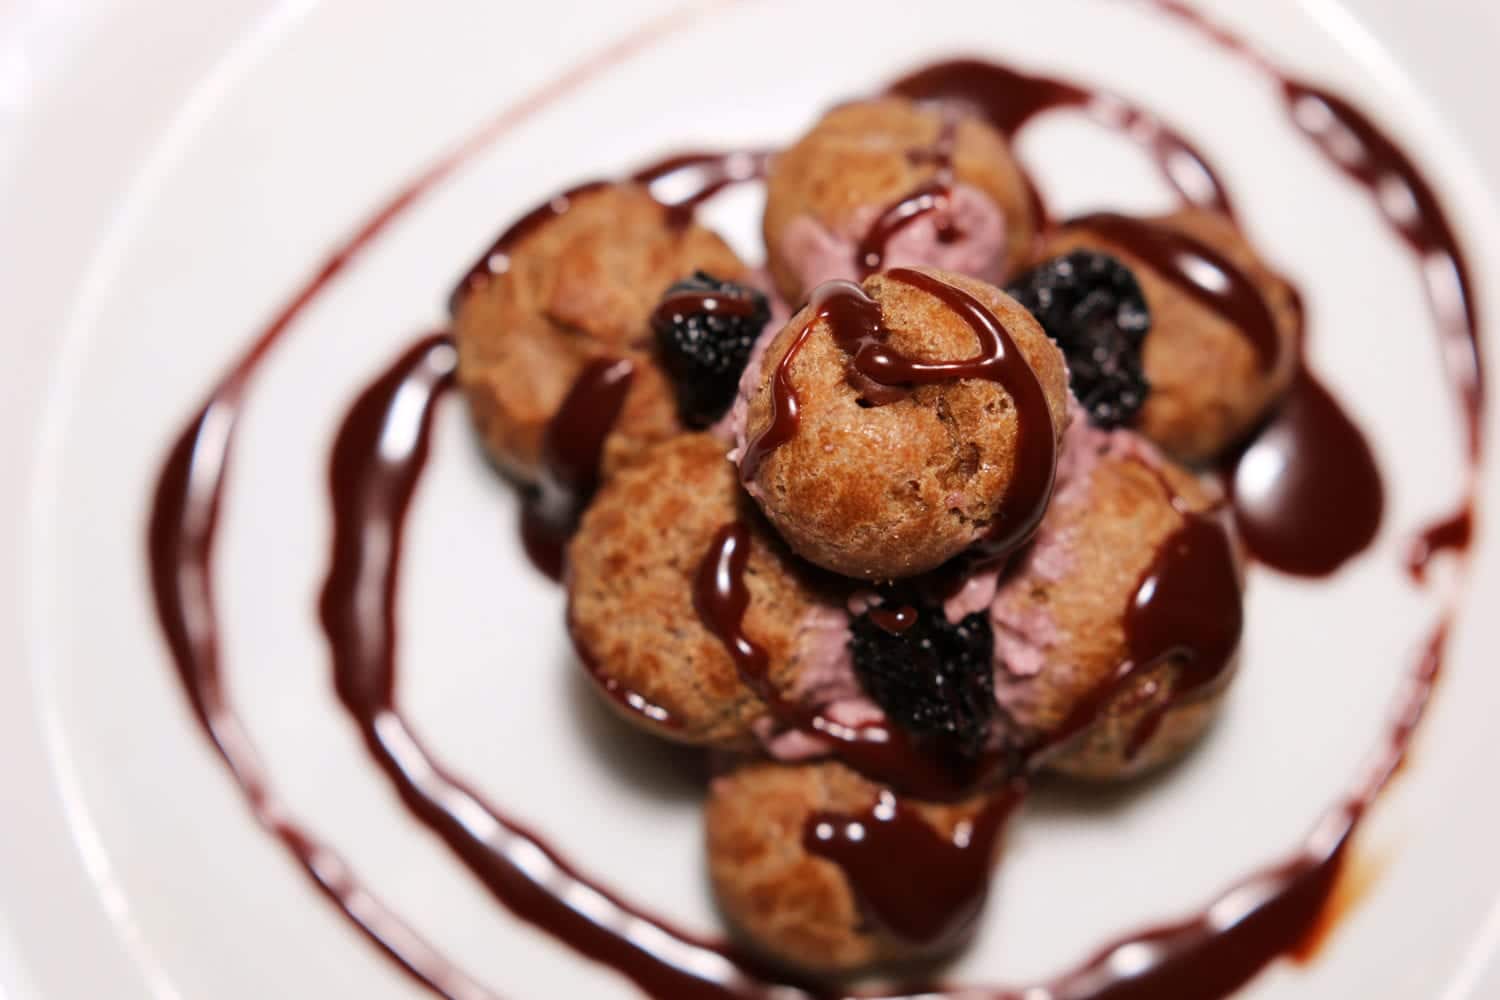 Pastry drizzeled with chocolate sauce